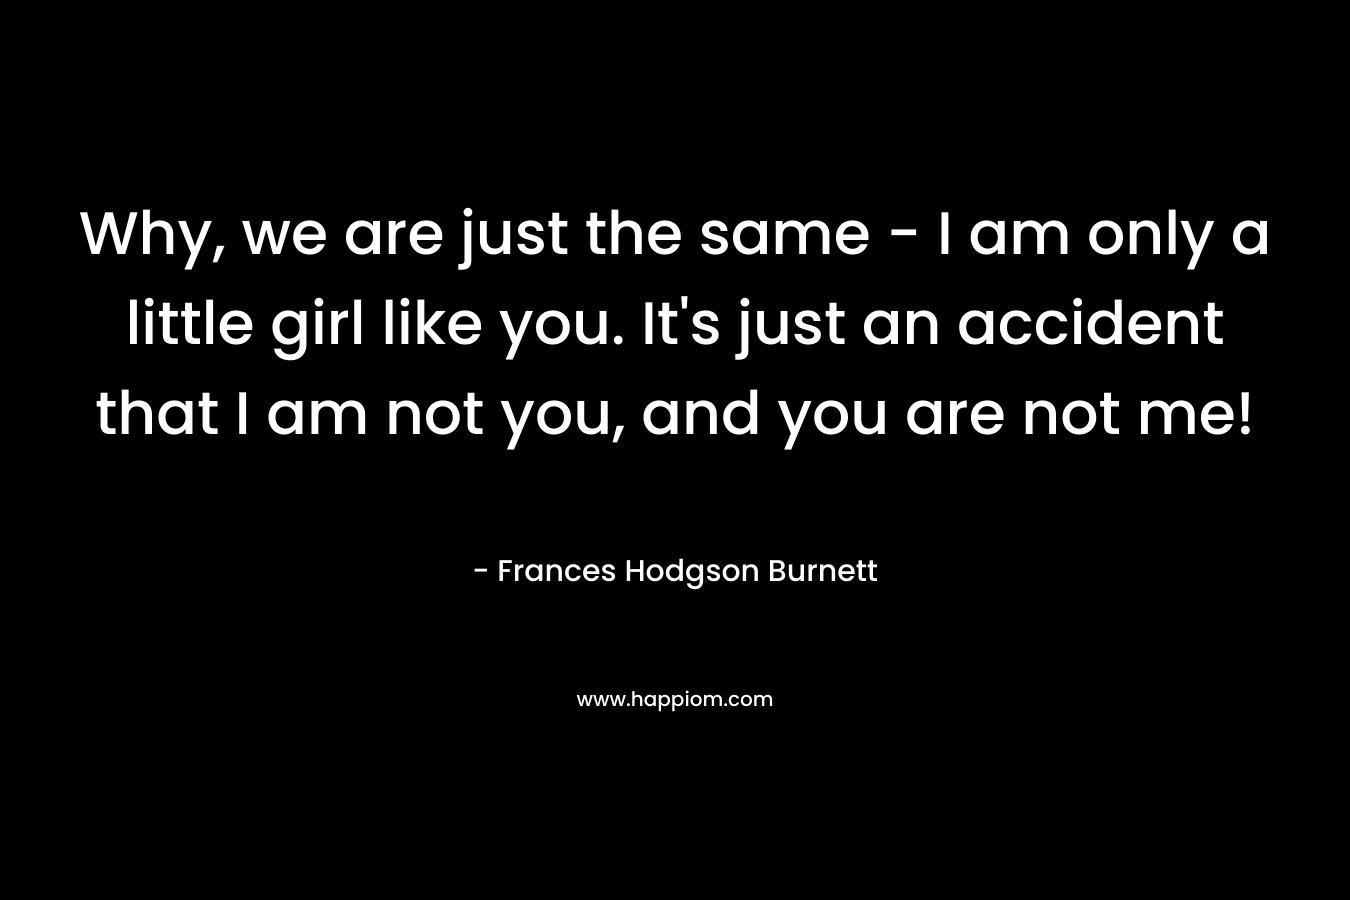 Why, we are just the same - I am only a little girl like you. It's just an accident that I am not you, and you are not me!